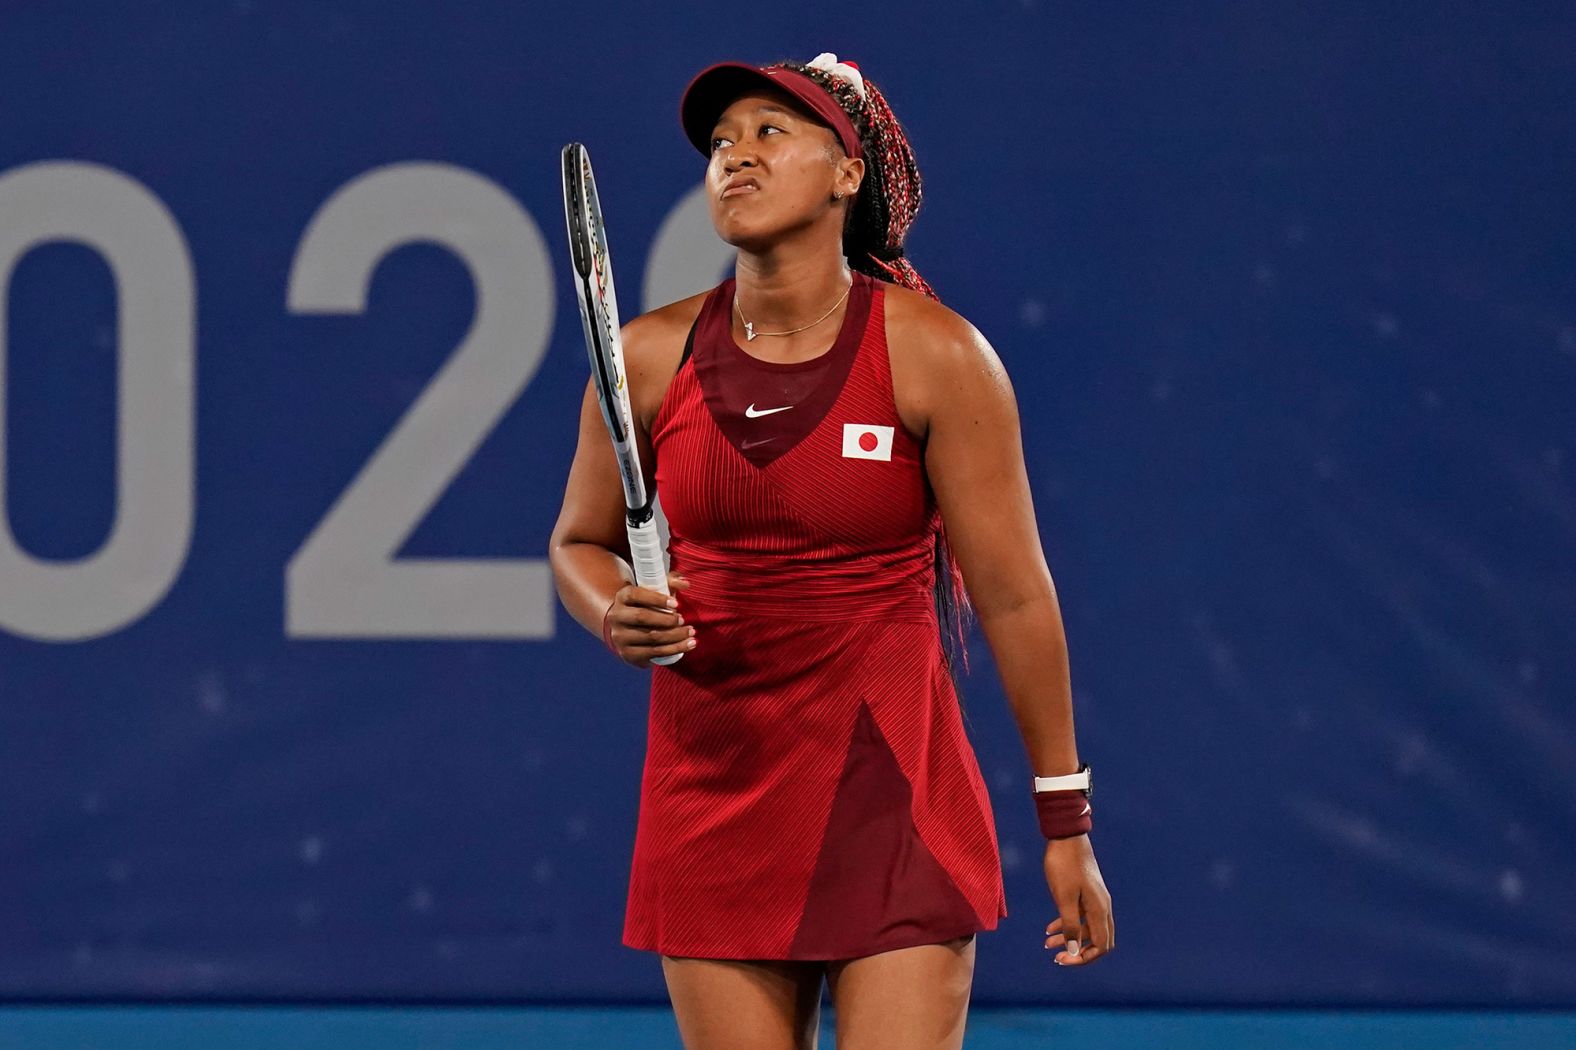 Japanese tennis star Naomi Osaka reacts during <a href="index.php?page=&url=https%3A%2F%2Fwww.cnn.com%2F2021%2F07%2F27%2Ftennis%2Fnaomi-osaka-loses-olympics-3rd-round-spt-intl%2Findex.html" target="_blank">her third-round loss</a> to the Czech Republic's Marketa Vondrousova on July 27. Osaka, who lit the Olympic cauldron during the opening ceremony, had 32 unforced errors in the match. It's the first time she has lost in a hard-court tournament since the 2020 Australian Open.